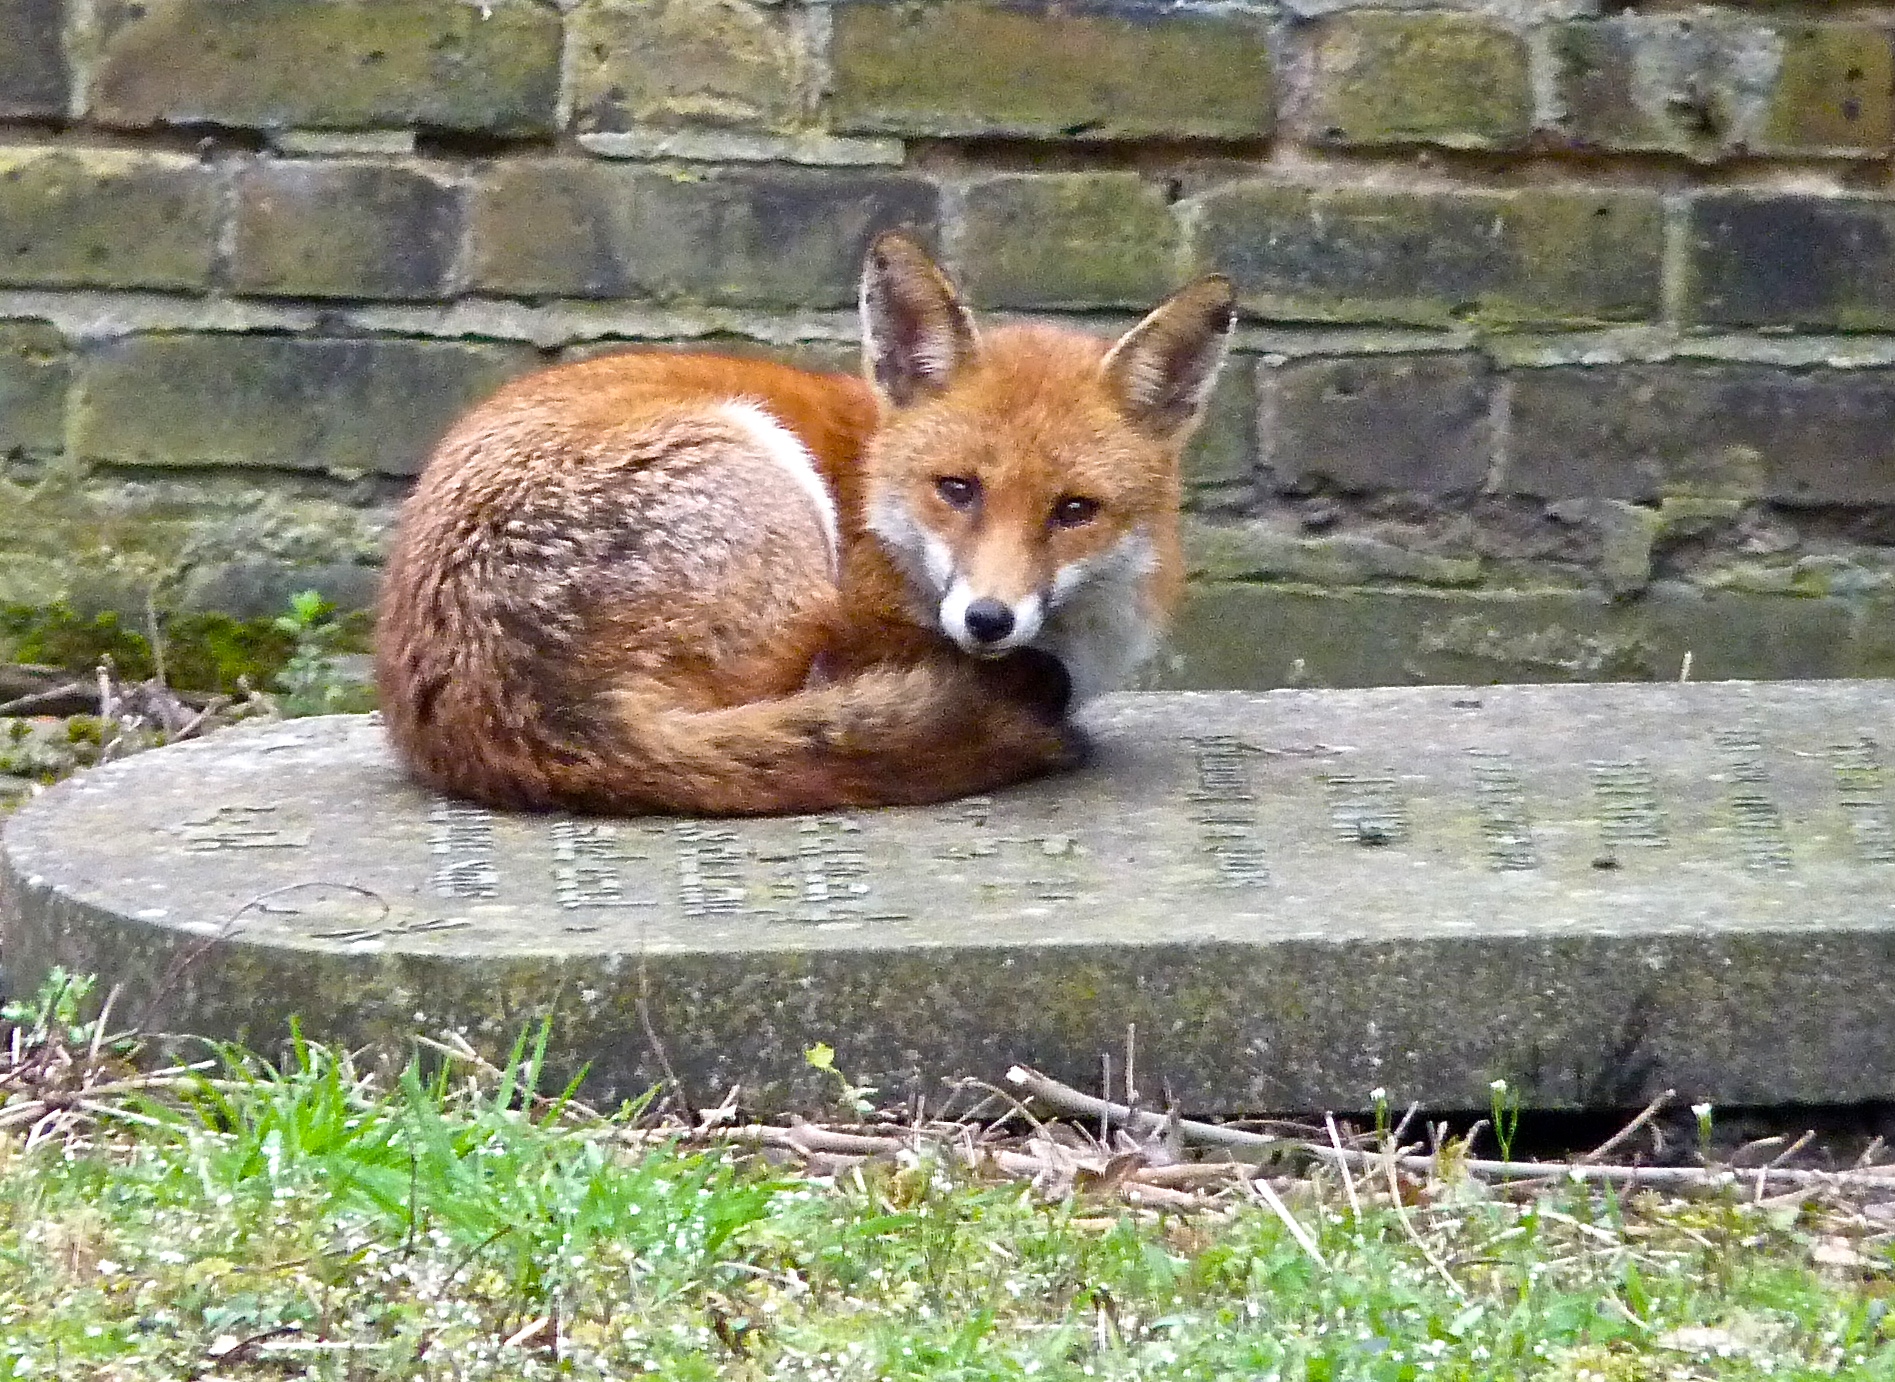  This is Foxykins. Foxykins is a red-tailed fox who lives next door. She is pretty and smells good but likes to eat birds. Olive Daddy loves birds. My job is to protect the birds from Foxykins.&nbsp;Stay away from our garden, Foxykins! 